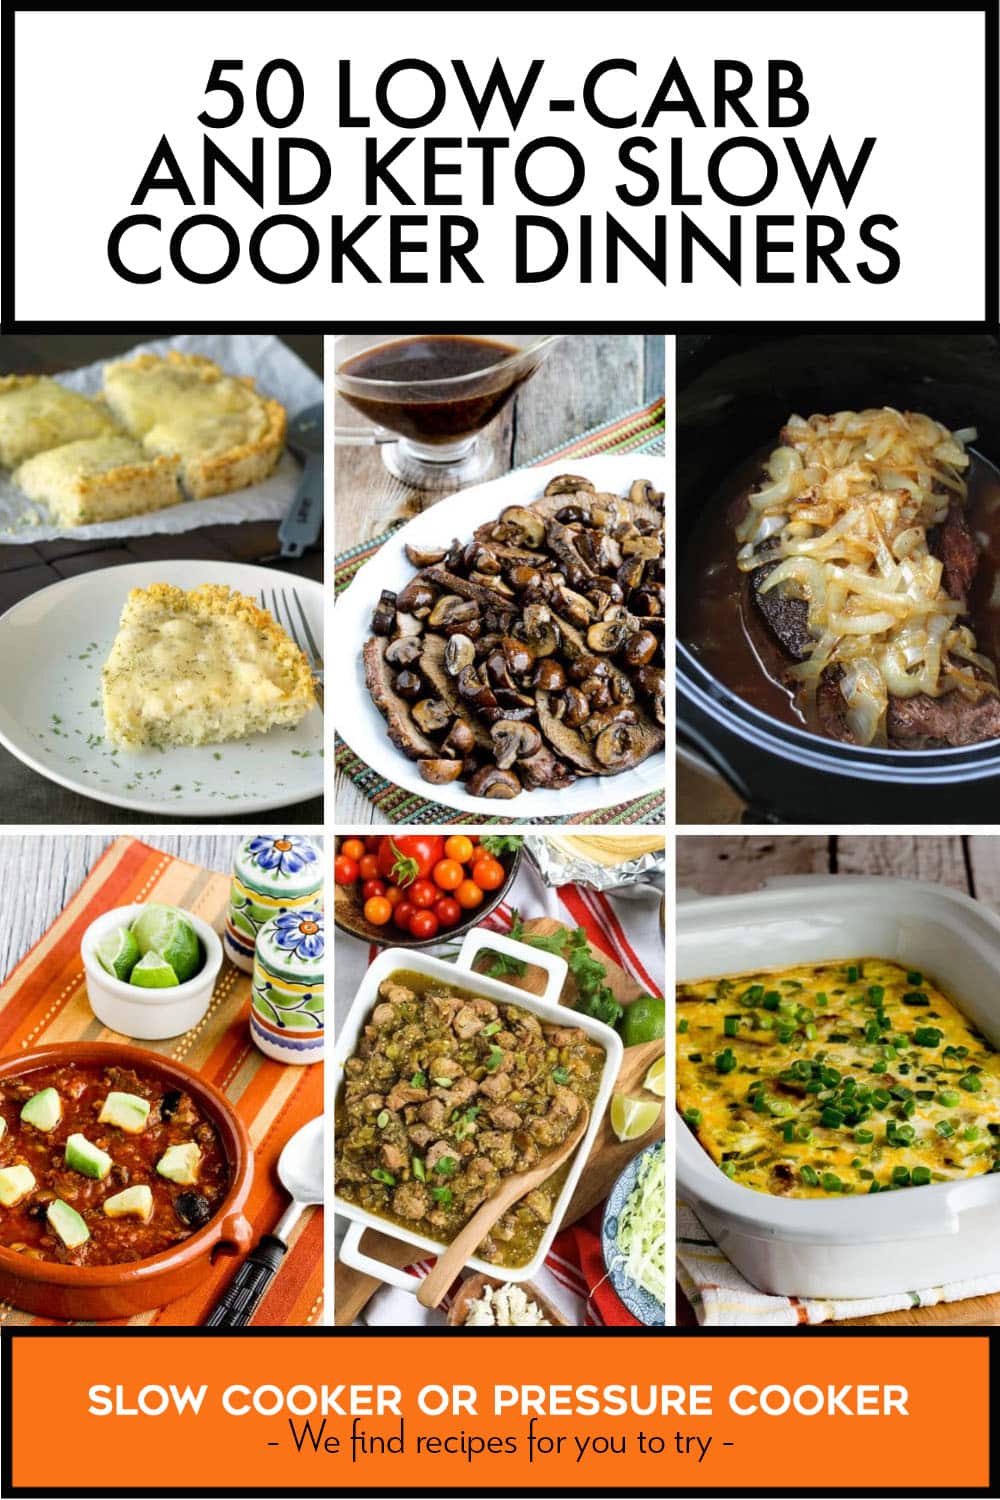 Pinterest image of 50 Low-Carb and Keto Slow Cooker Dinners